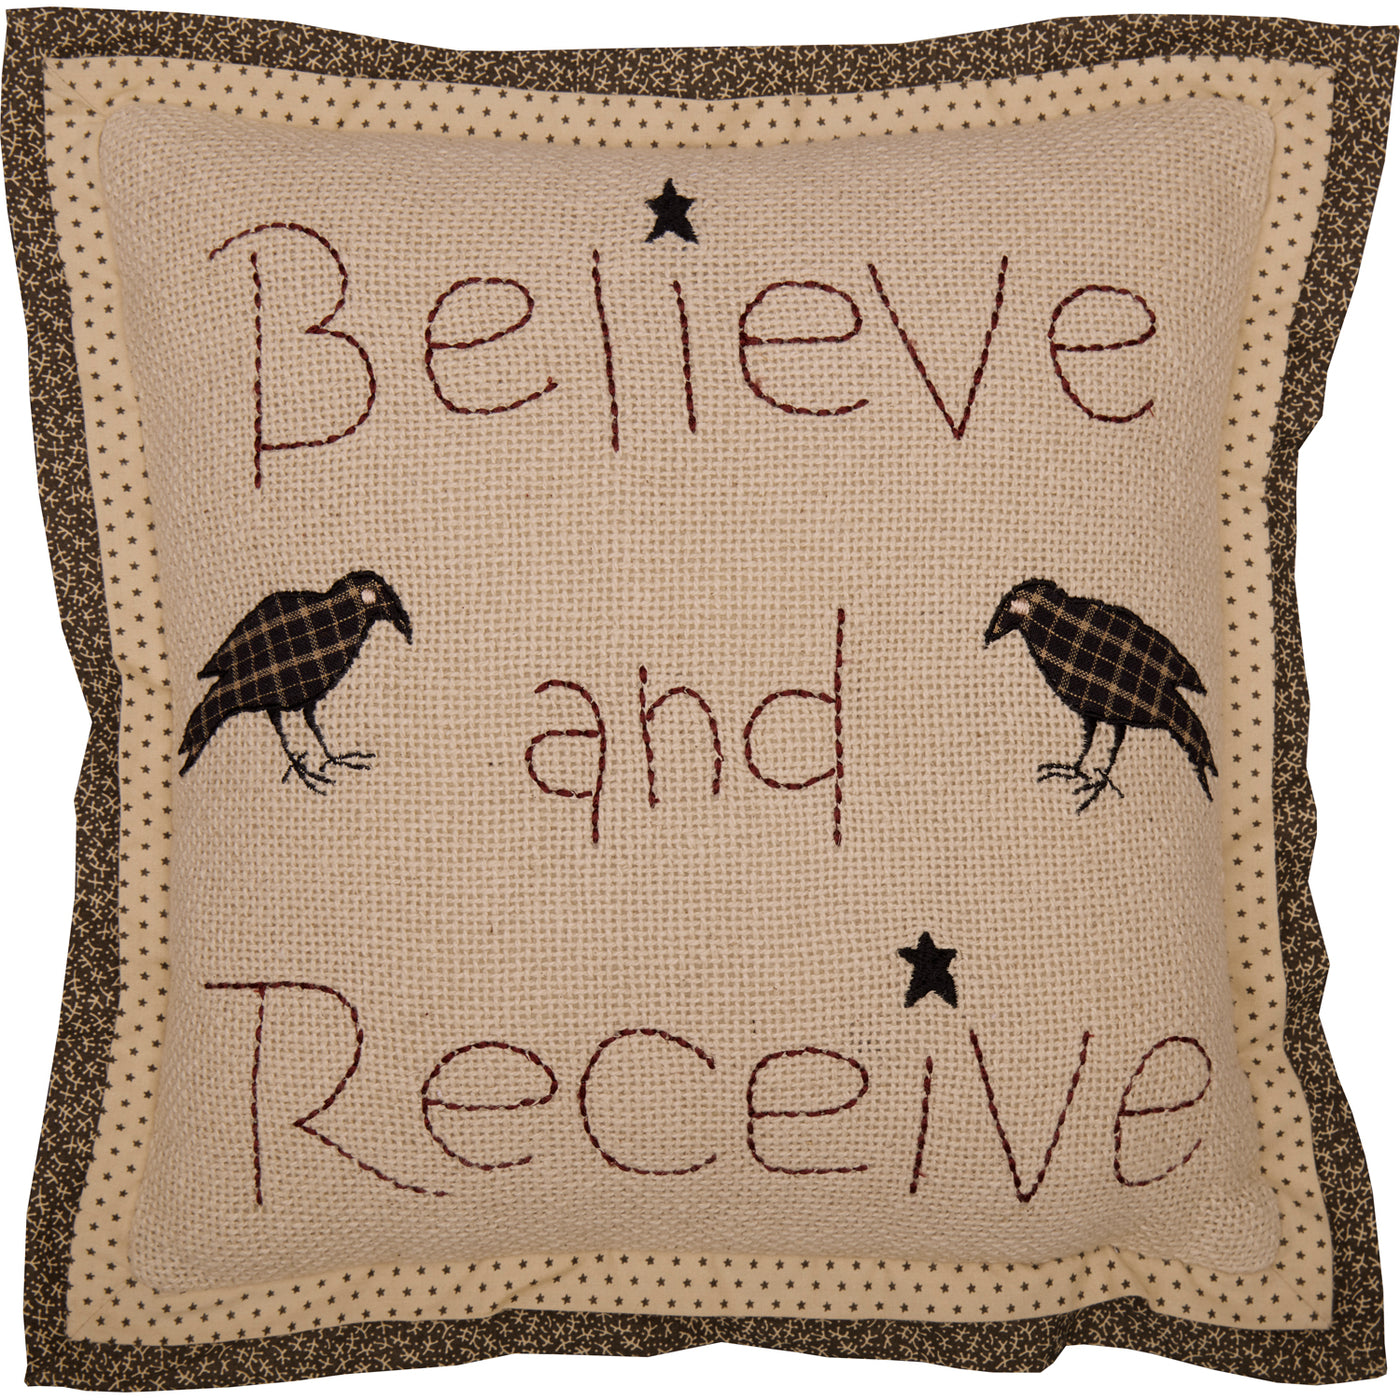 Kettle Grove Believe and Receive 12" Crow Pillow